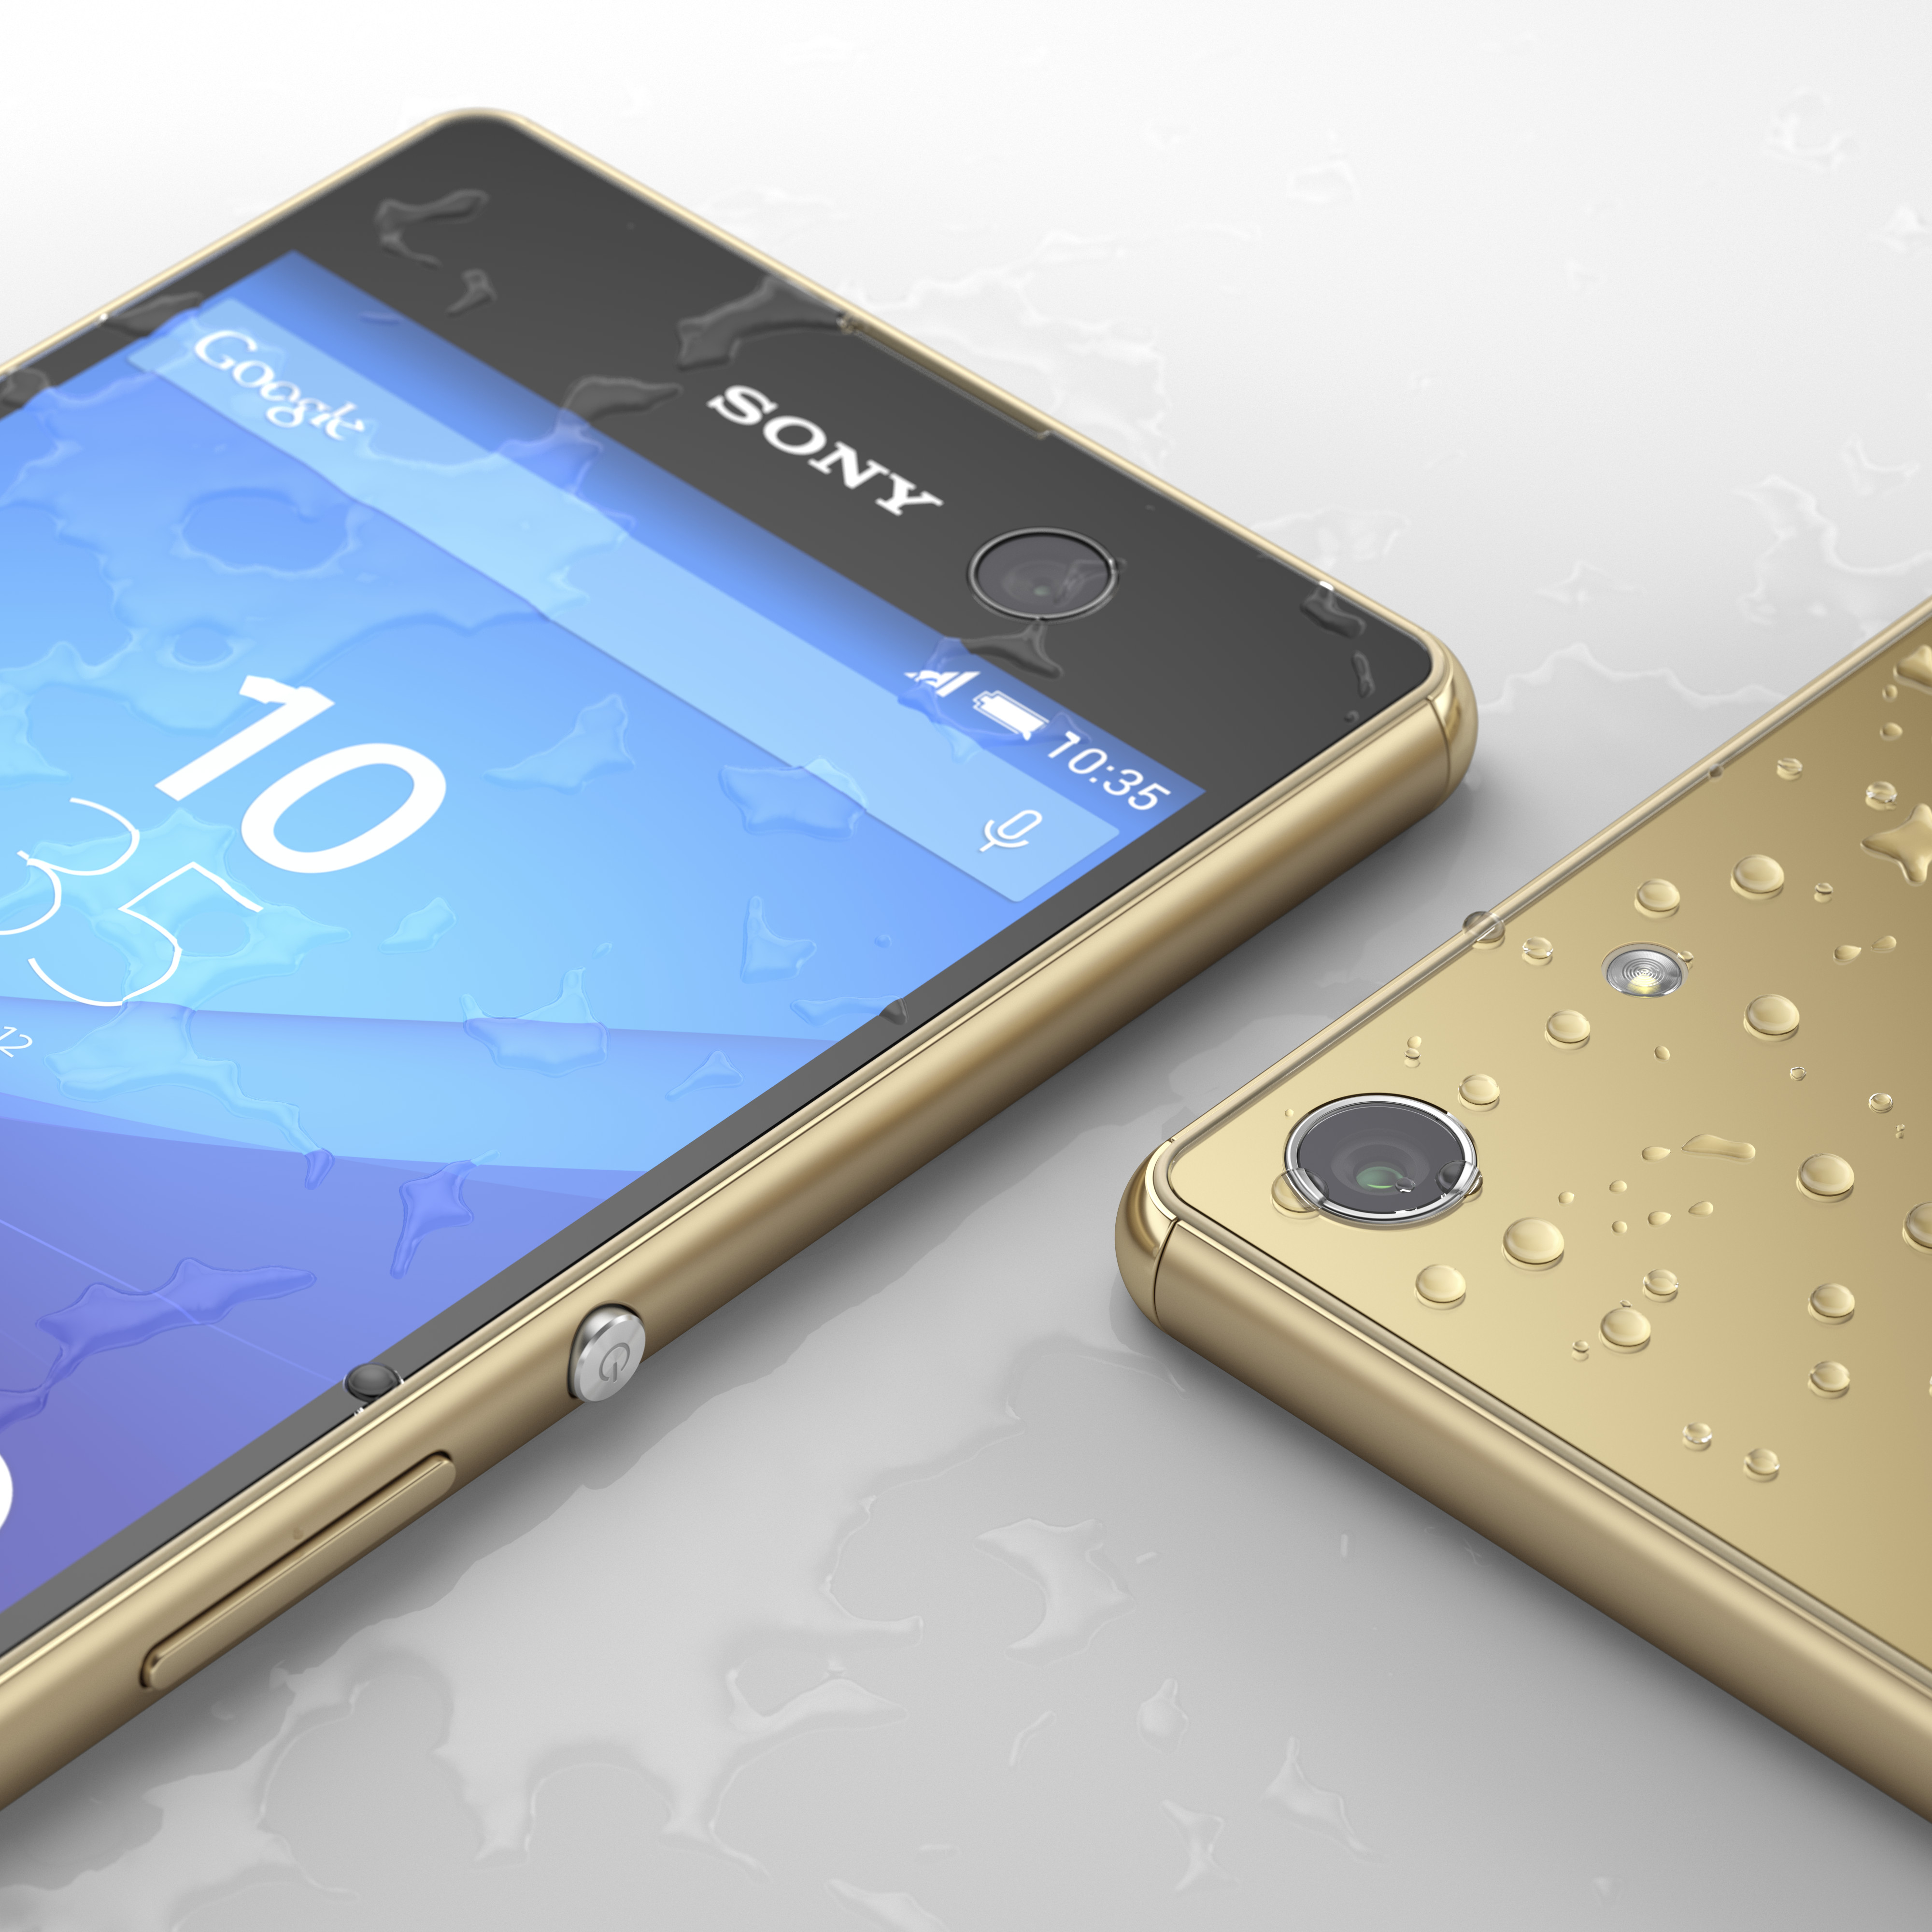 Sony calls their new Xperia C5 and Xperia M5 “super mid-range” smartphones – Phandroid